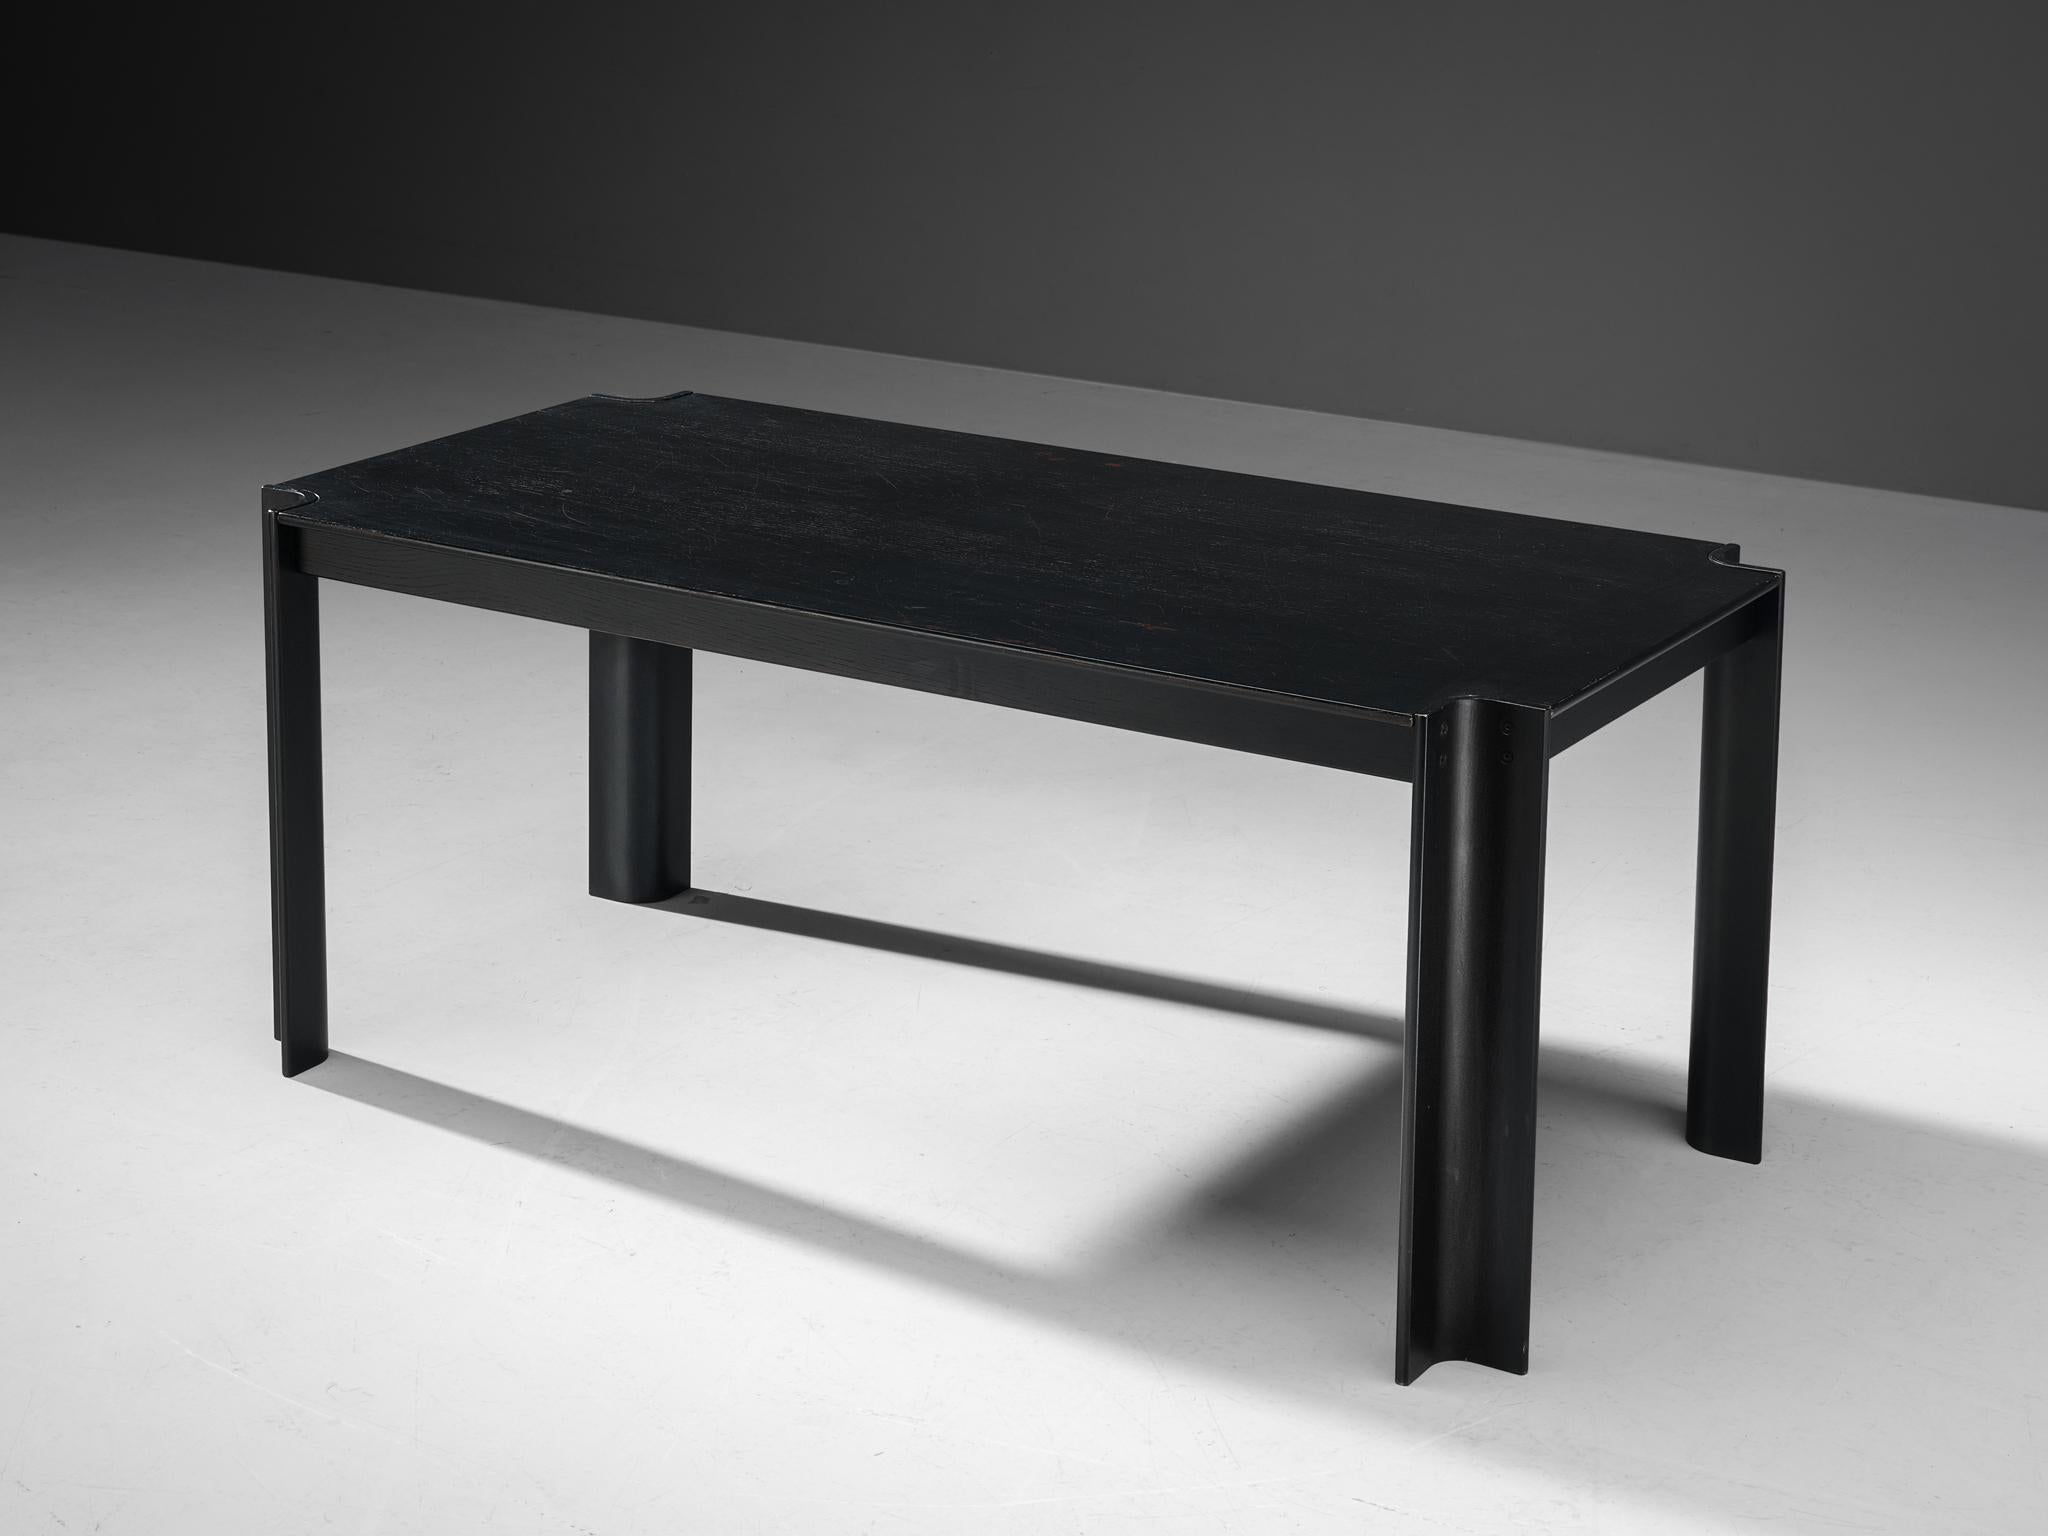 Gijs Bakker for Castelijn, 'Strip' dining table, black lacquered ash, the Netherlands, design 1974.

This table is designed by the Dutch furniture and jewelry designer Gijs Bakker. The dining table is designed in 1974 and distinguishes itself by